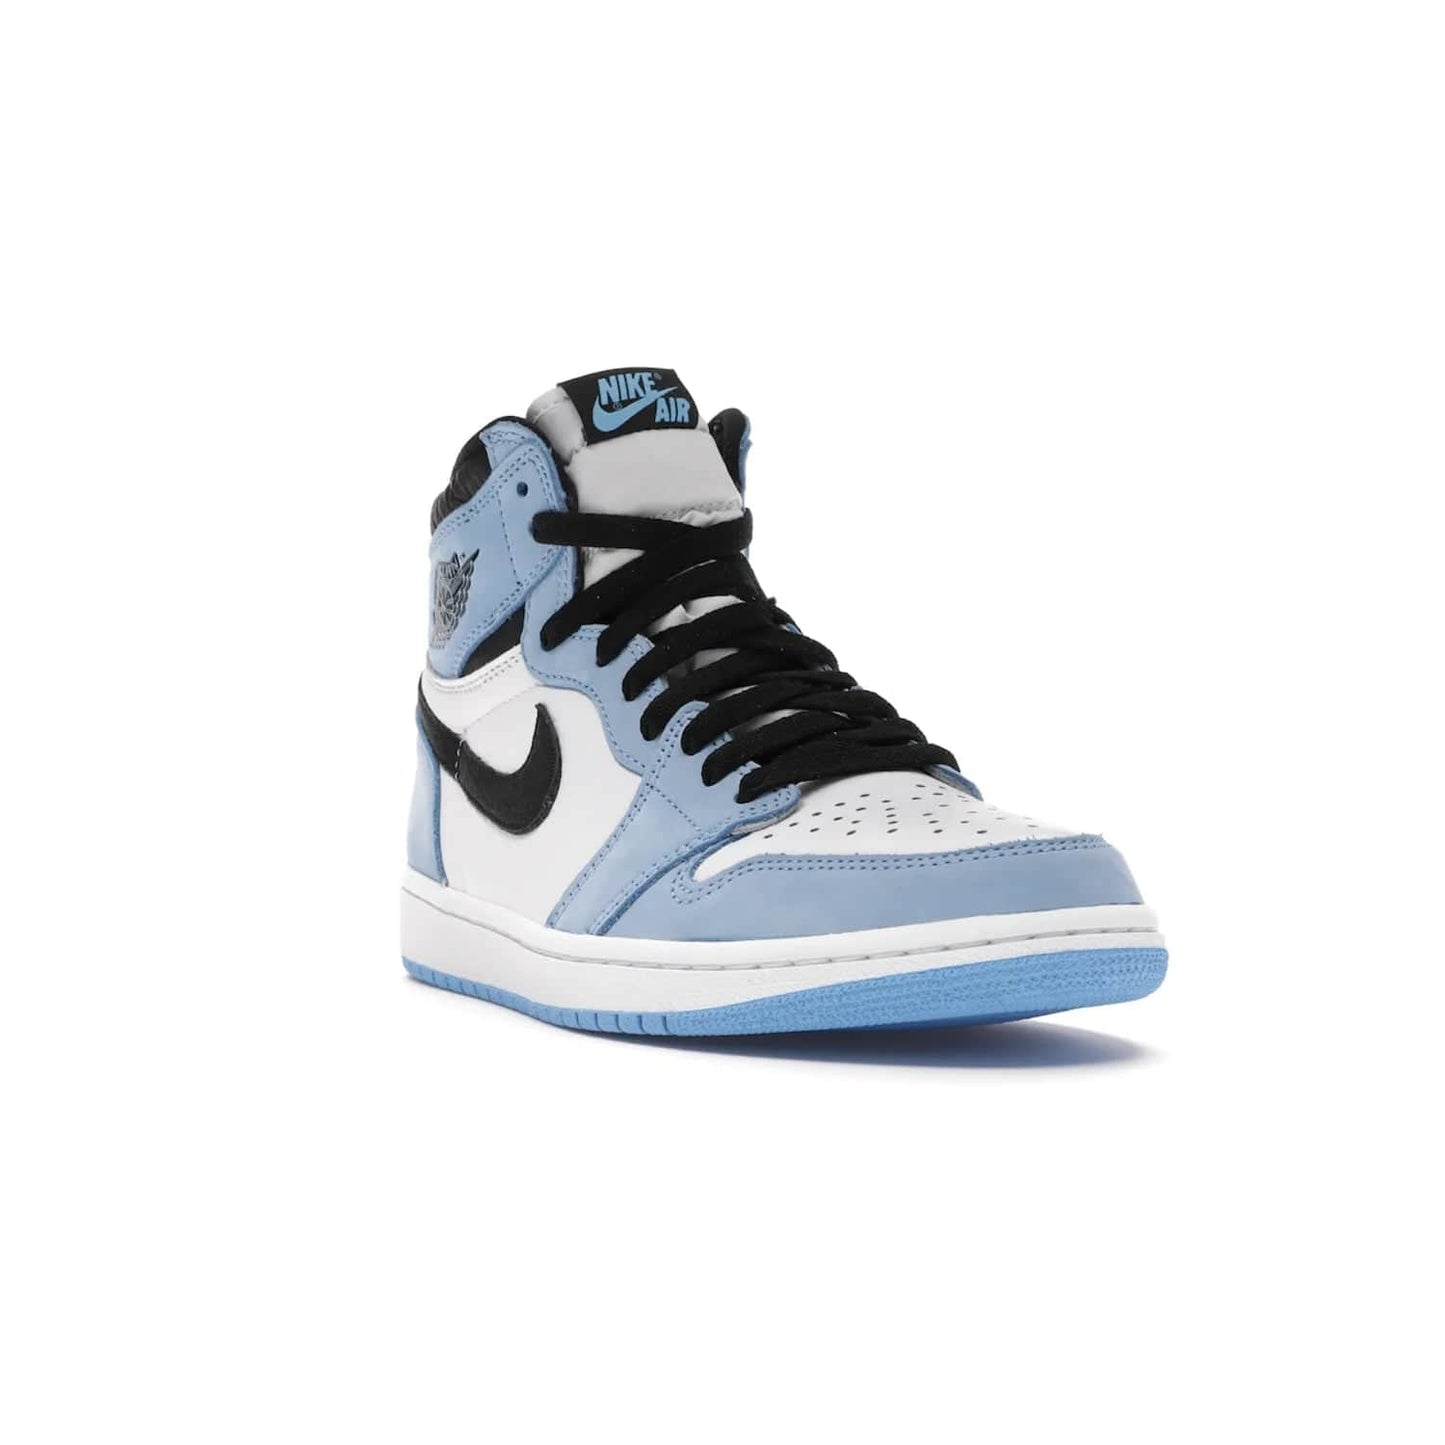 Jordan 1 Retro High White University Blue Black - Image 7 - Only at www.BallersClubKickz.com - Shop the Air Jordan 1 Retro High University Blue. White and black tumbled leather upper with University Blue Durabuck overlays, Nike Air woven label, Air Jordan Wings Logo, white midsole and University Blue outsole. Available March 2021.